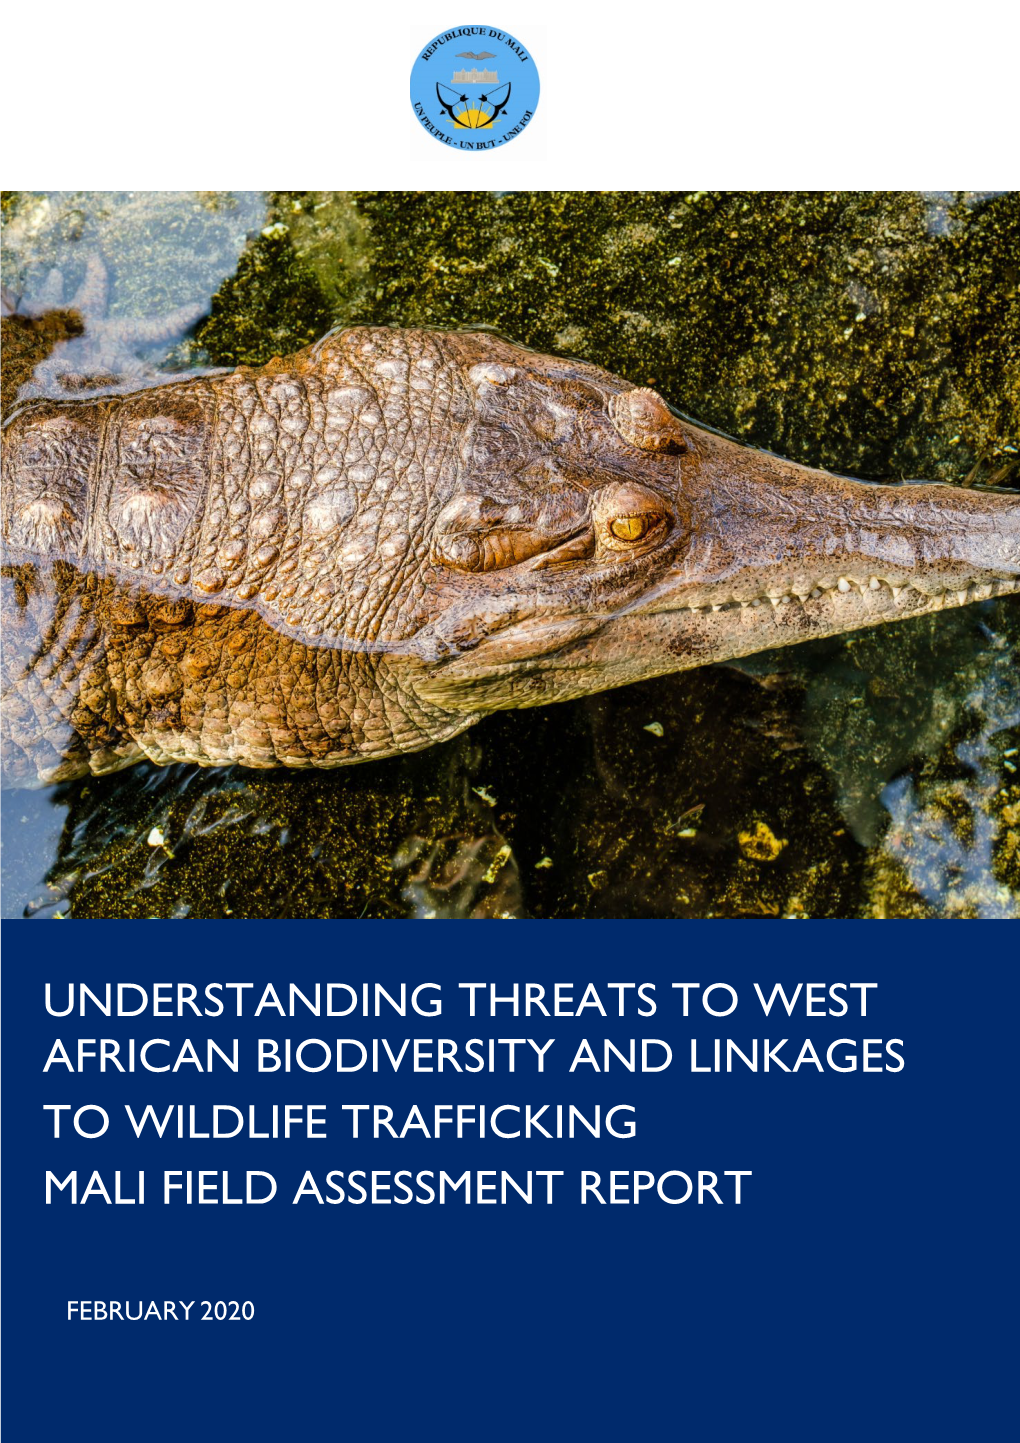 Understanding Threats to West African Biodiversity and Linkages to Wildlife Trafficking Mali Field Assessment Report